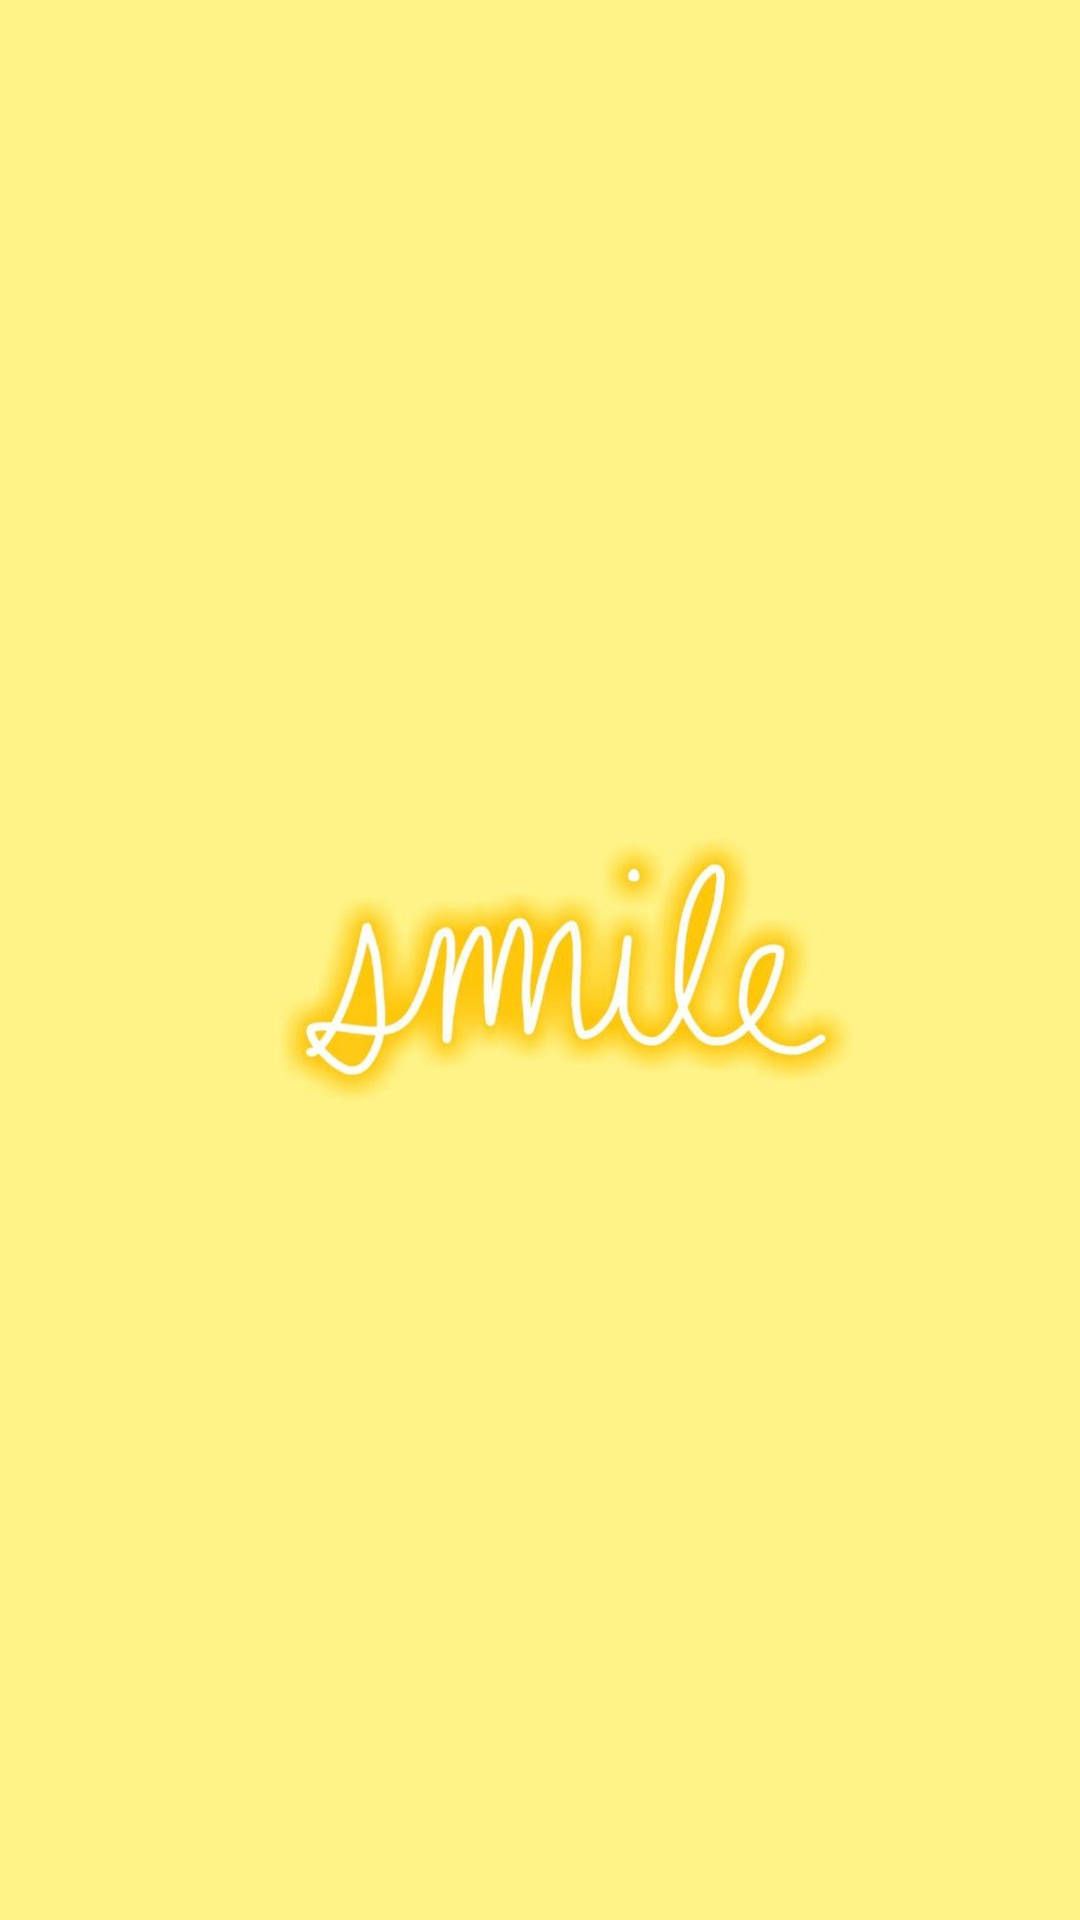 IPhone wallpaper with the word smile - Smile, pastel yellow